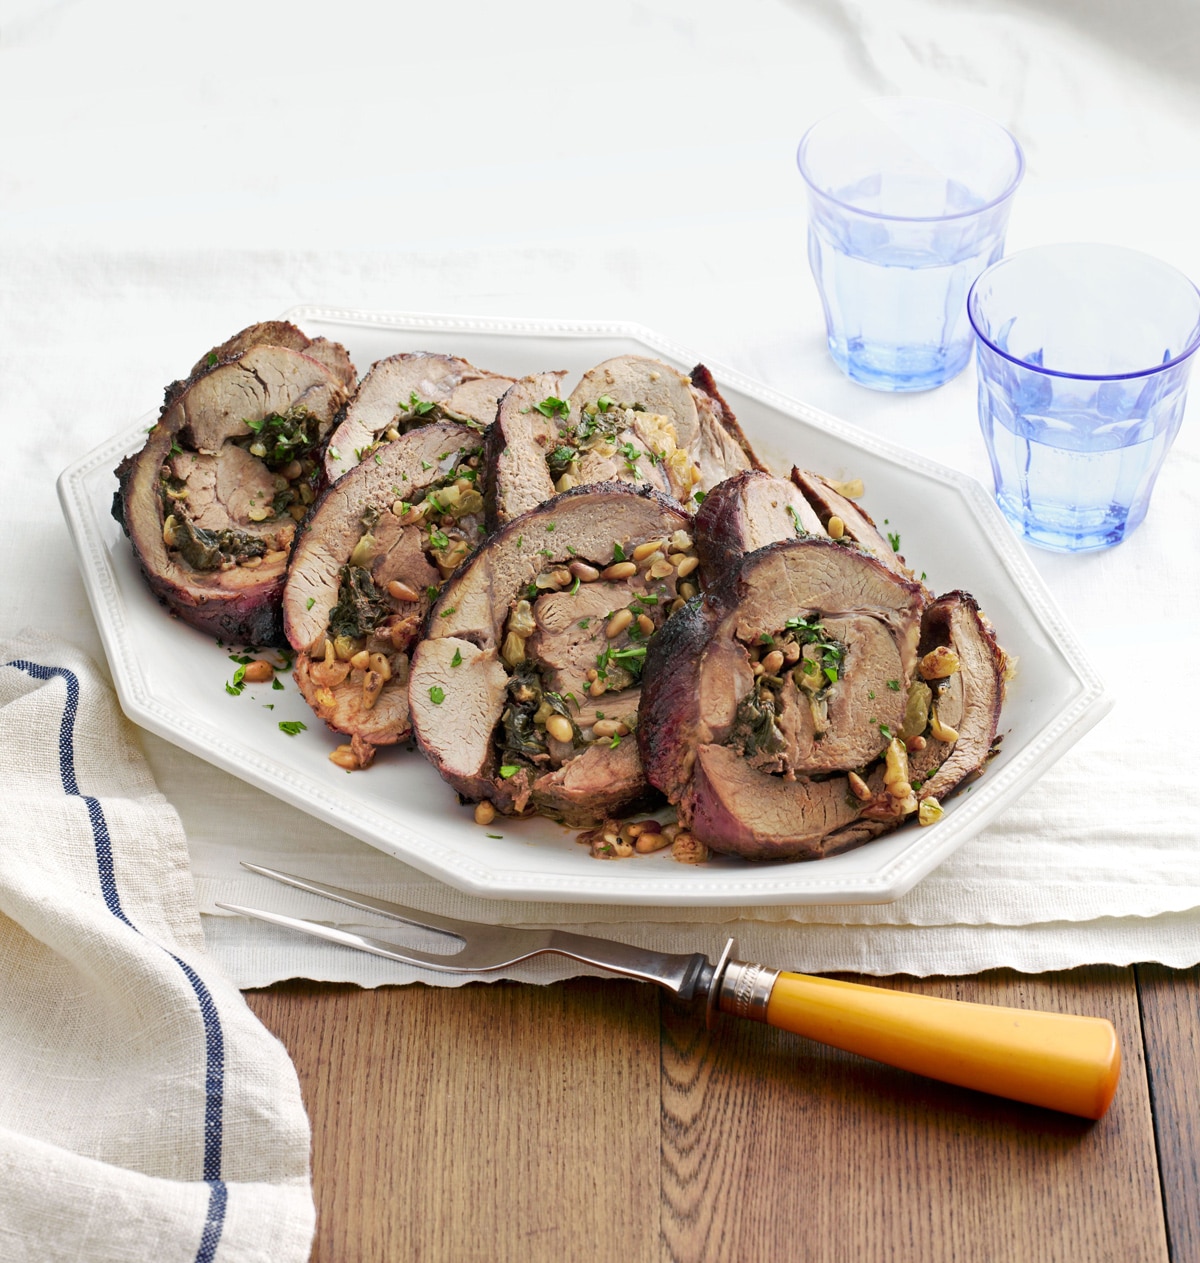 Spinach-and-pine-nut-stuffed leg of lamb